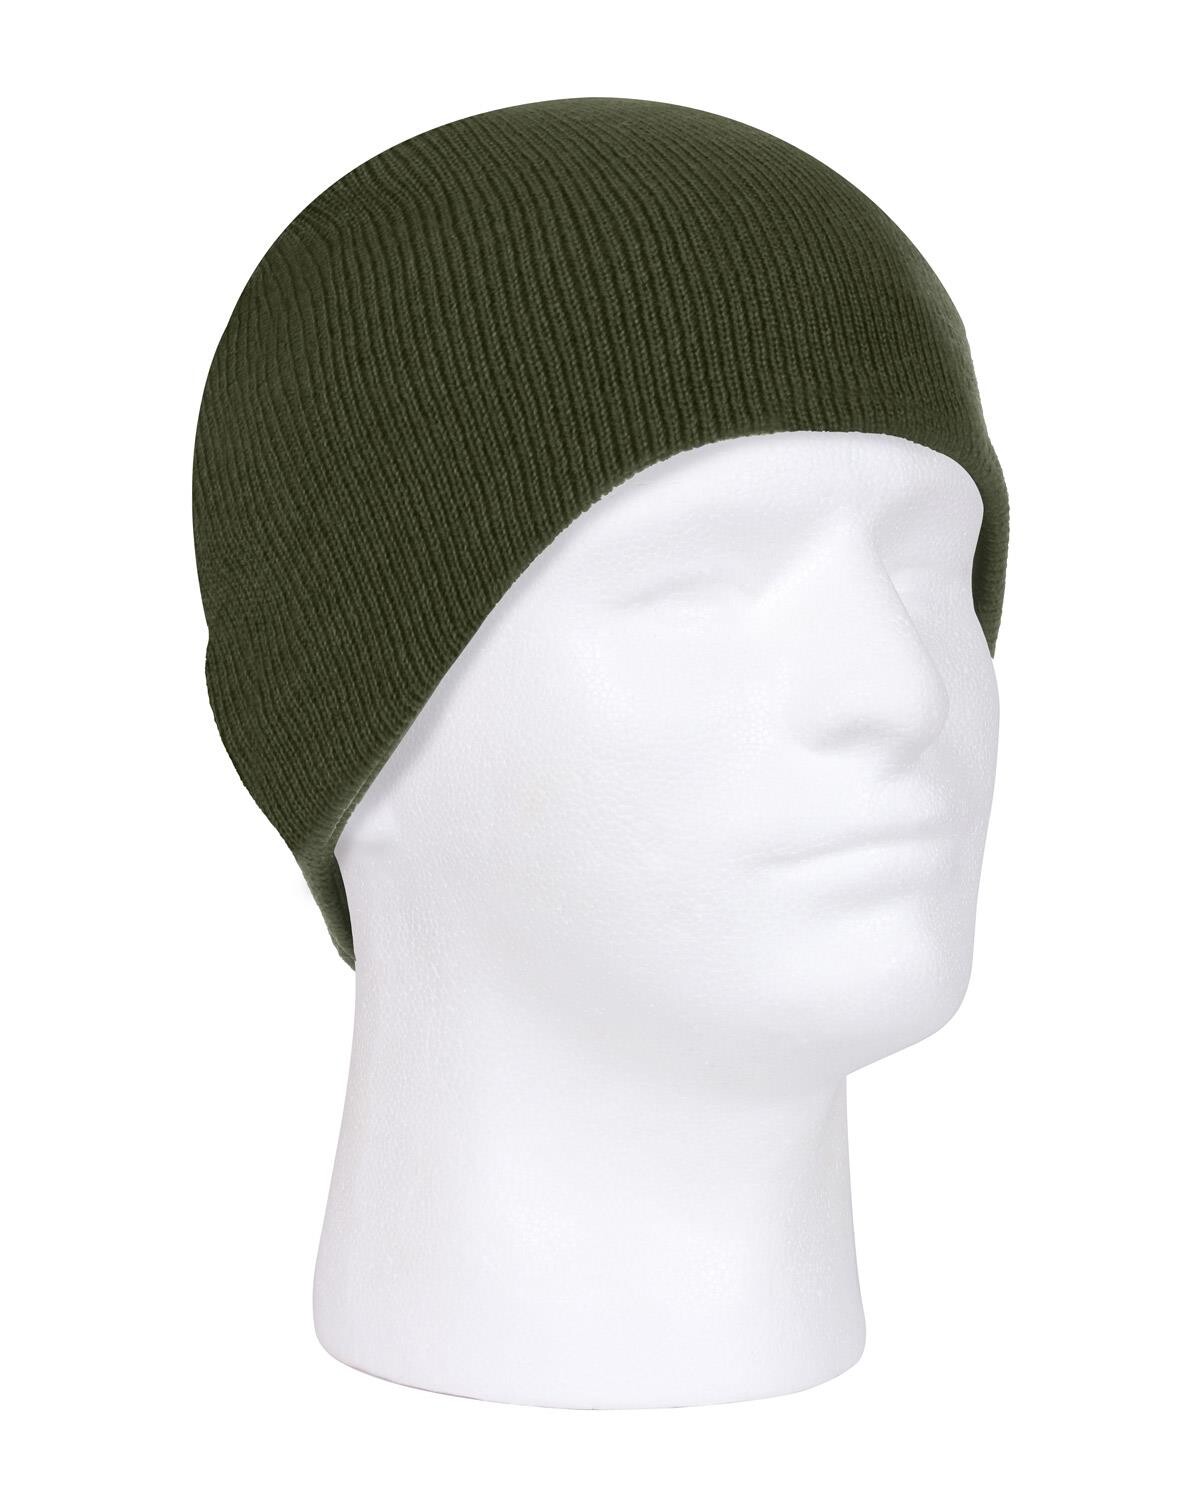 #2 - Rothco Beanie (Oliven, One Size)